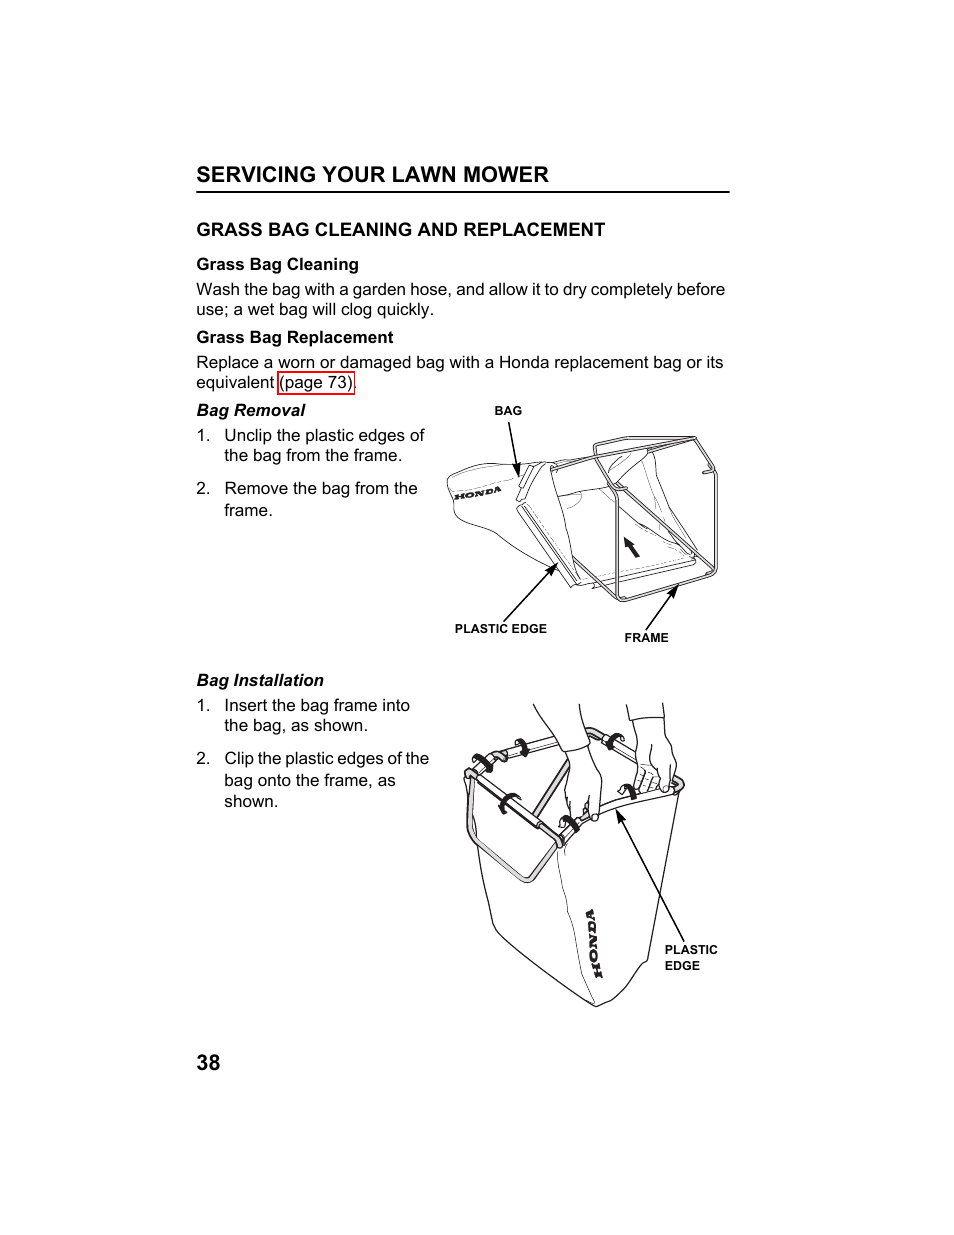 Grass bag cleaning and replacement, Servicing your lawn mower 38 HONDA HRX217HXA User Manual